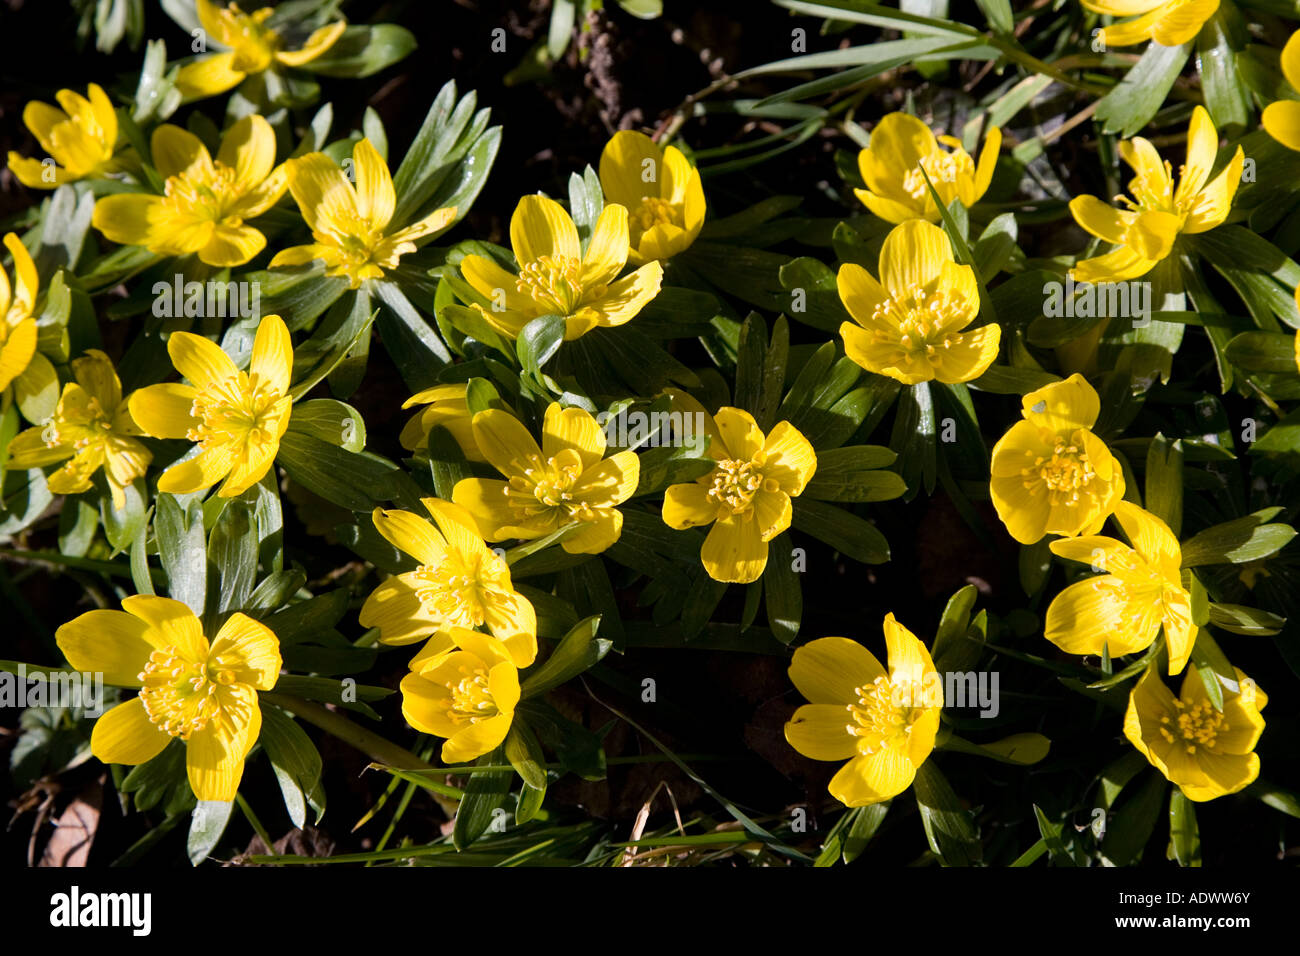 Aconites growing in meadow Oxfordshire United Kingdom Stock Photo